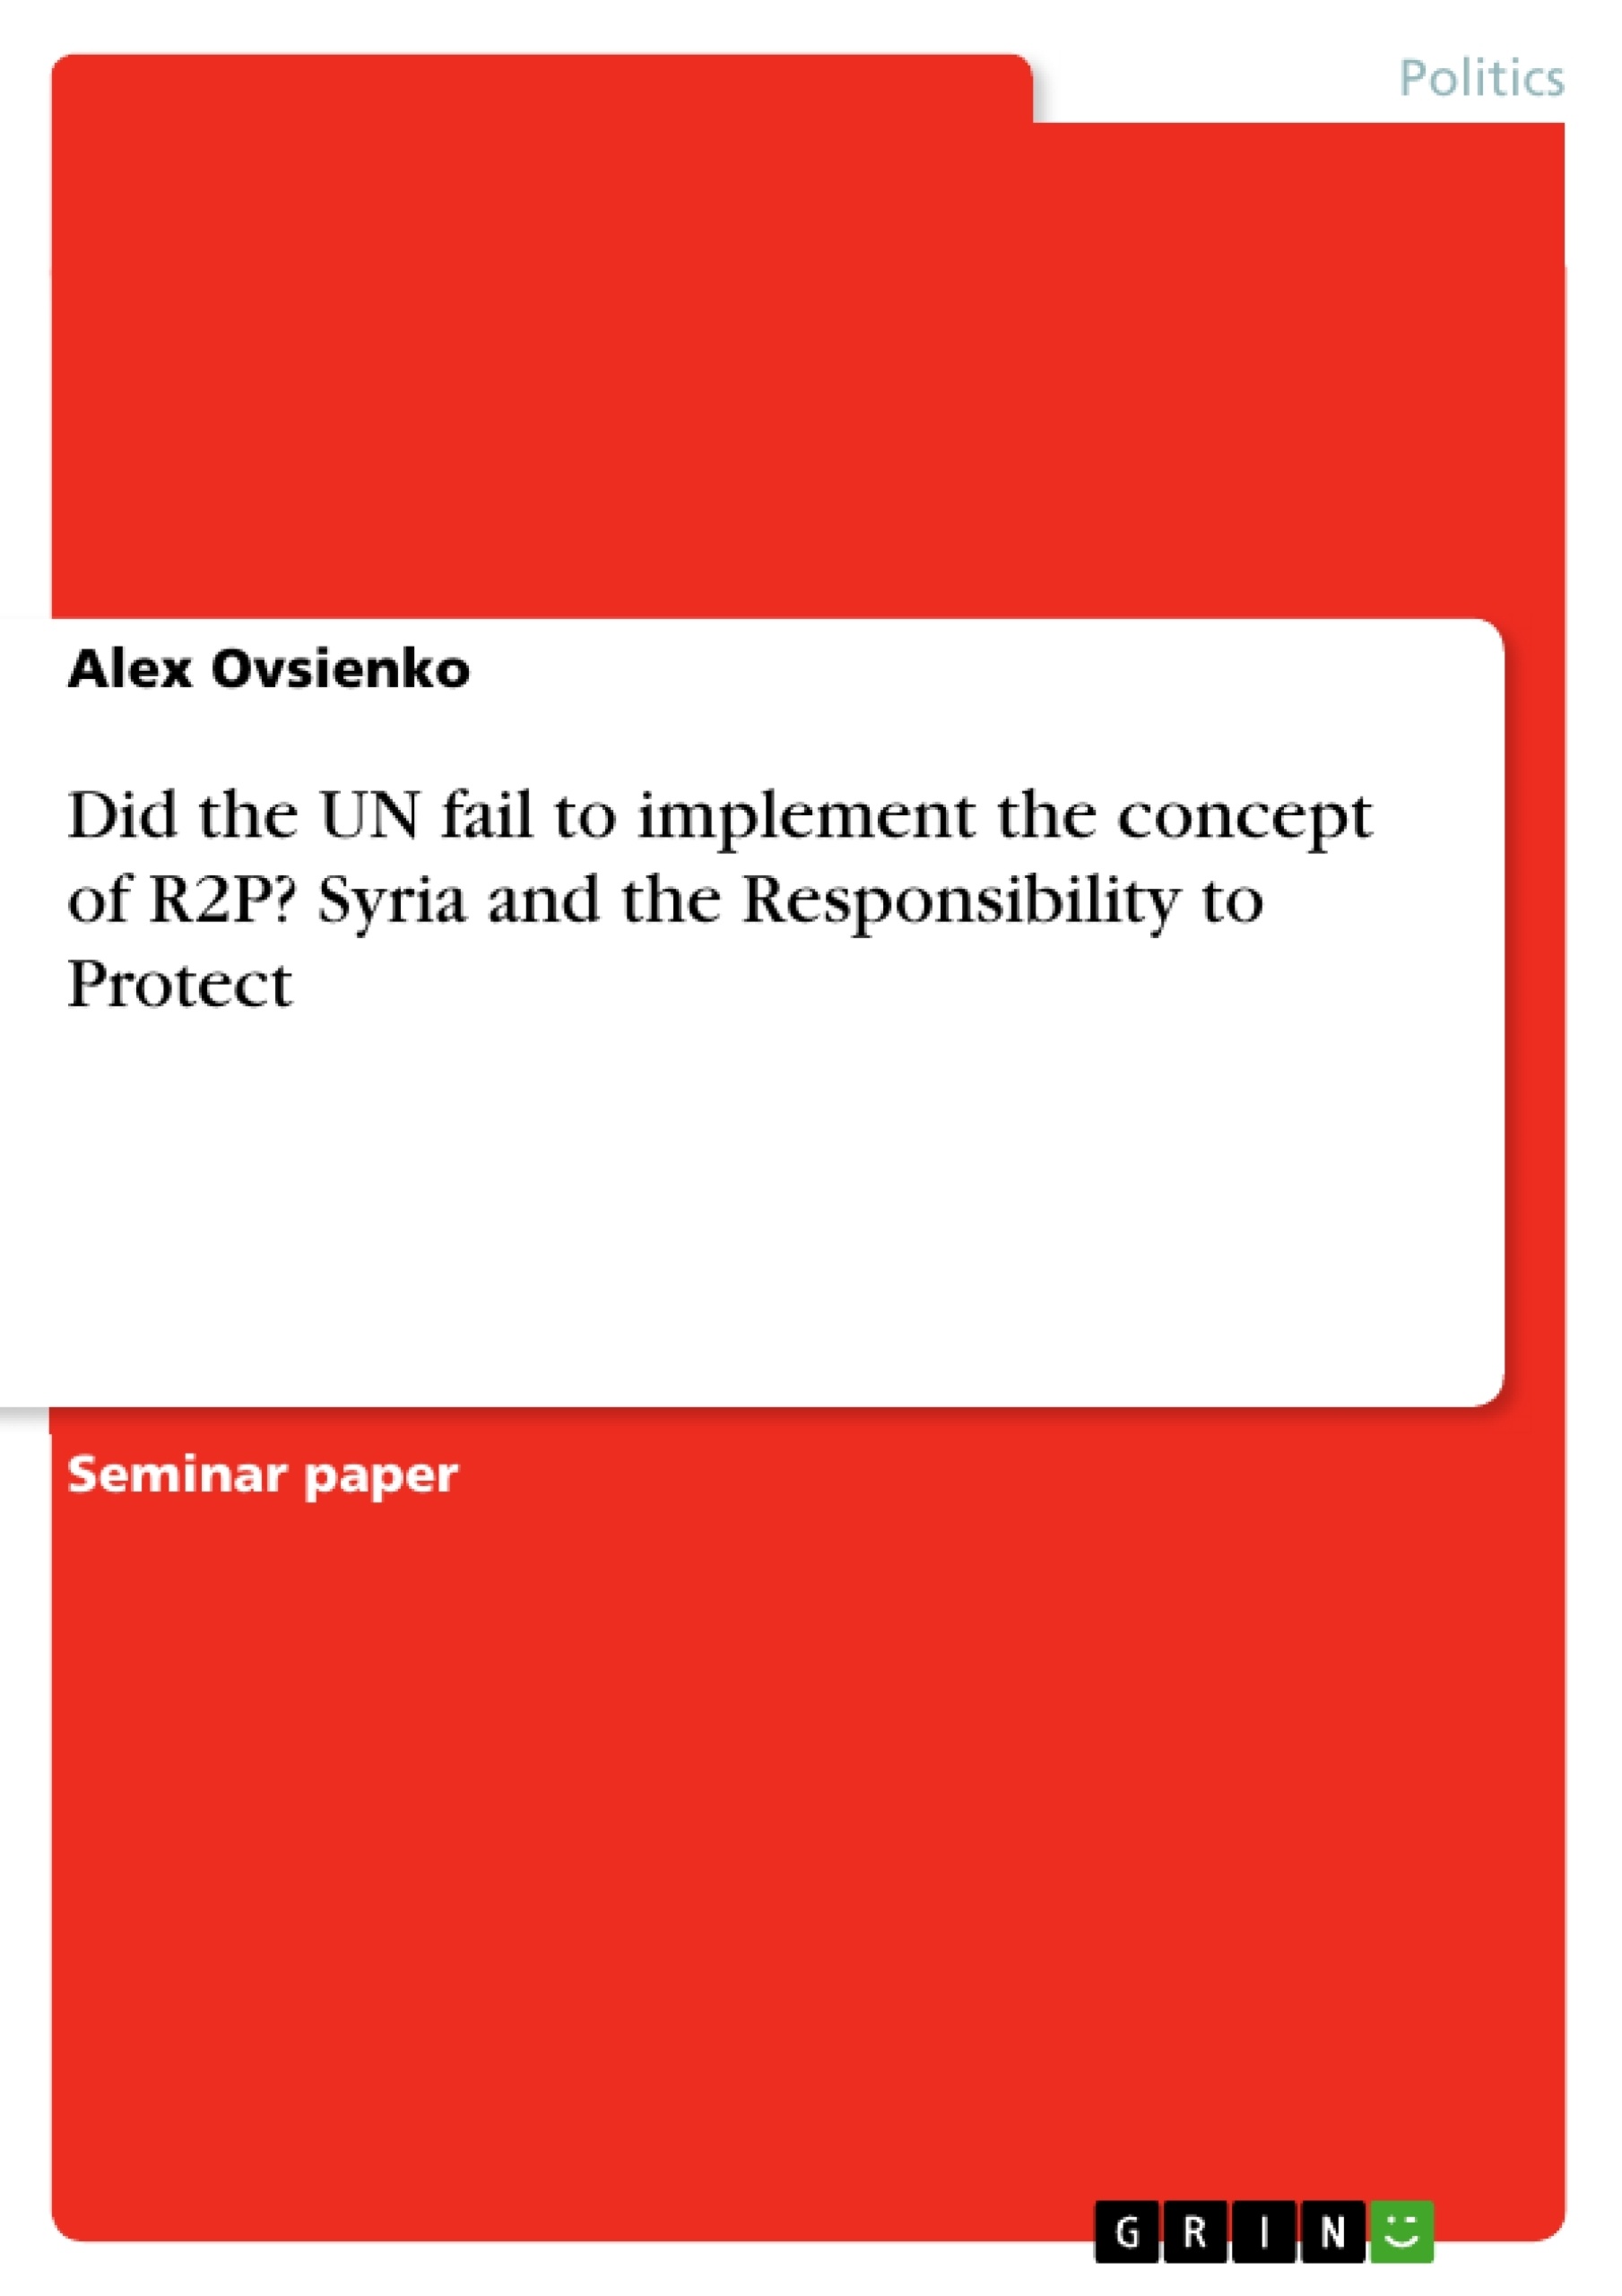 Title: Did the UN fail to implement the concept of R2P? Syria and the Responsibility to Protect